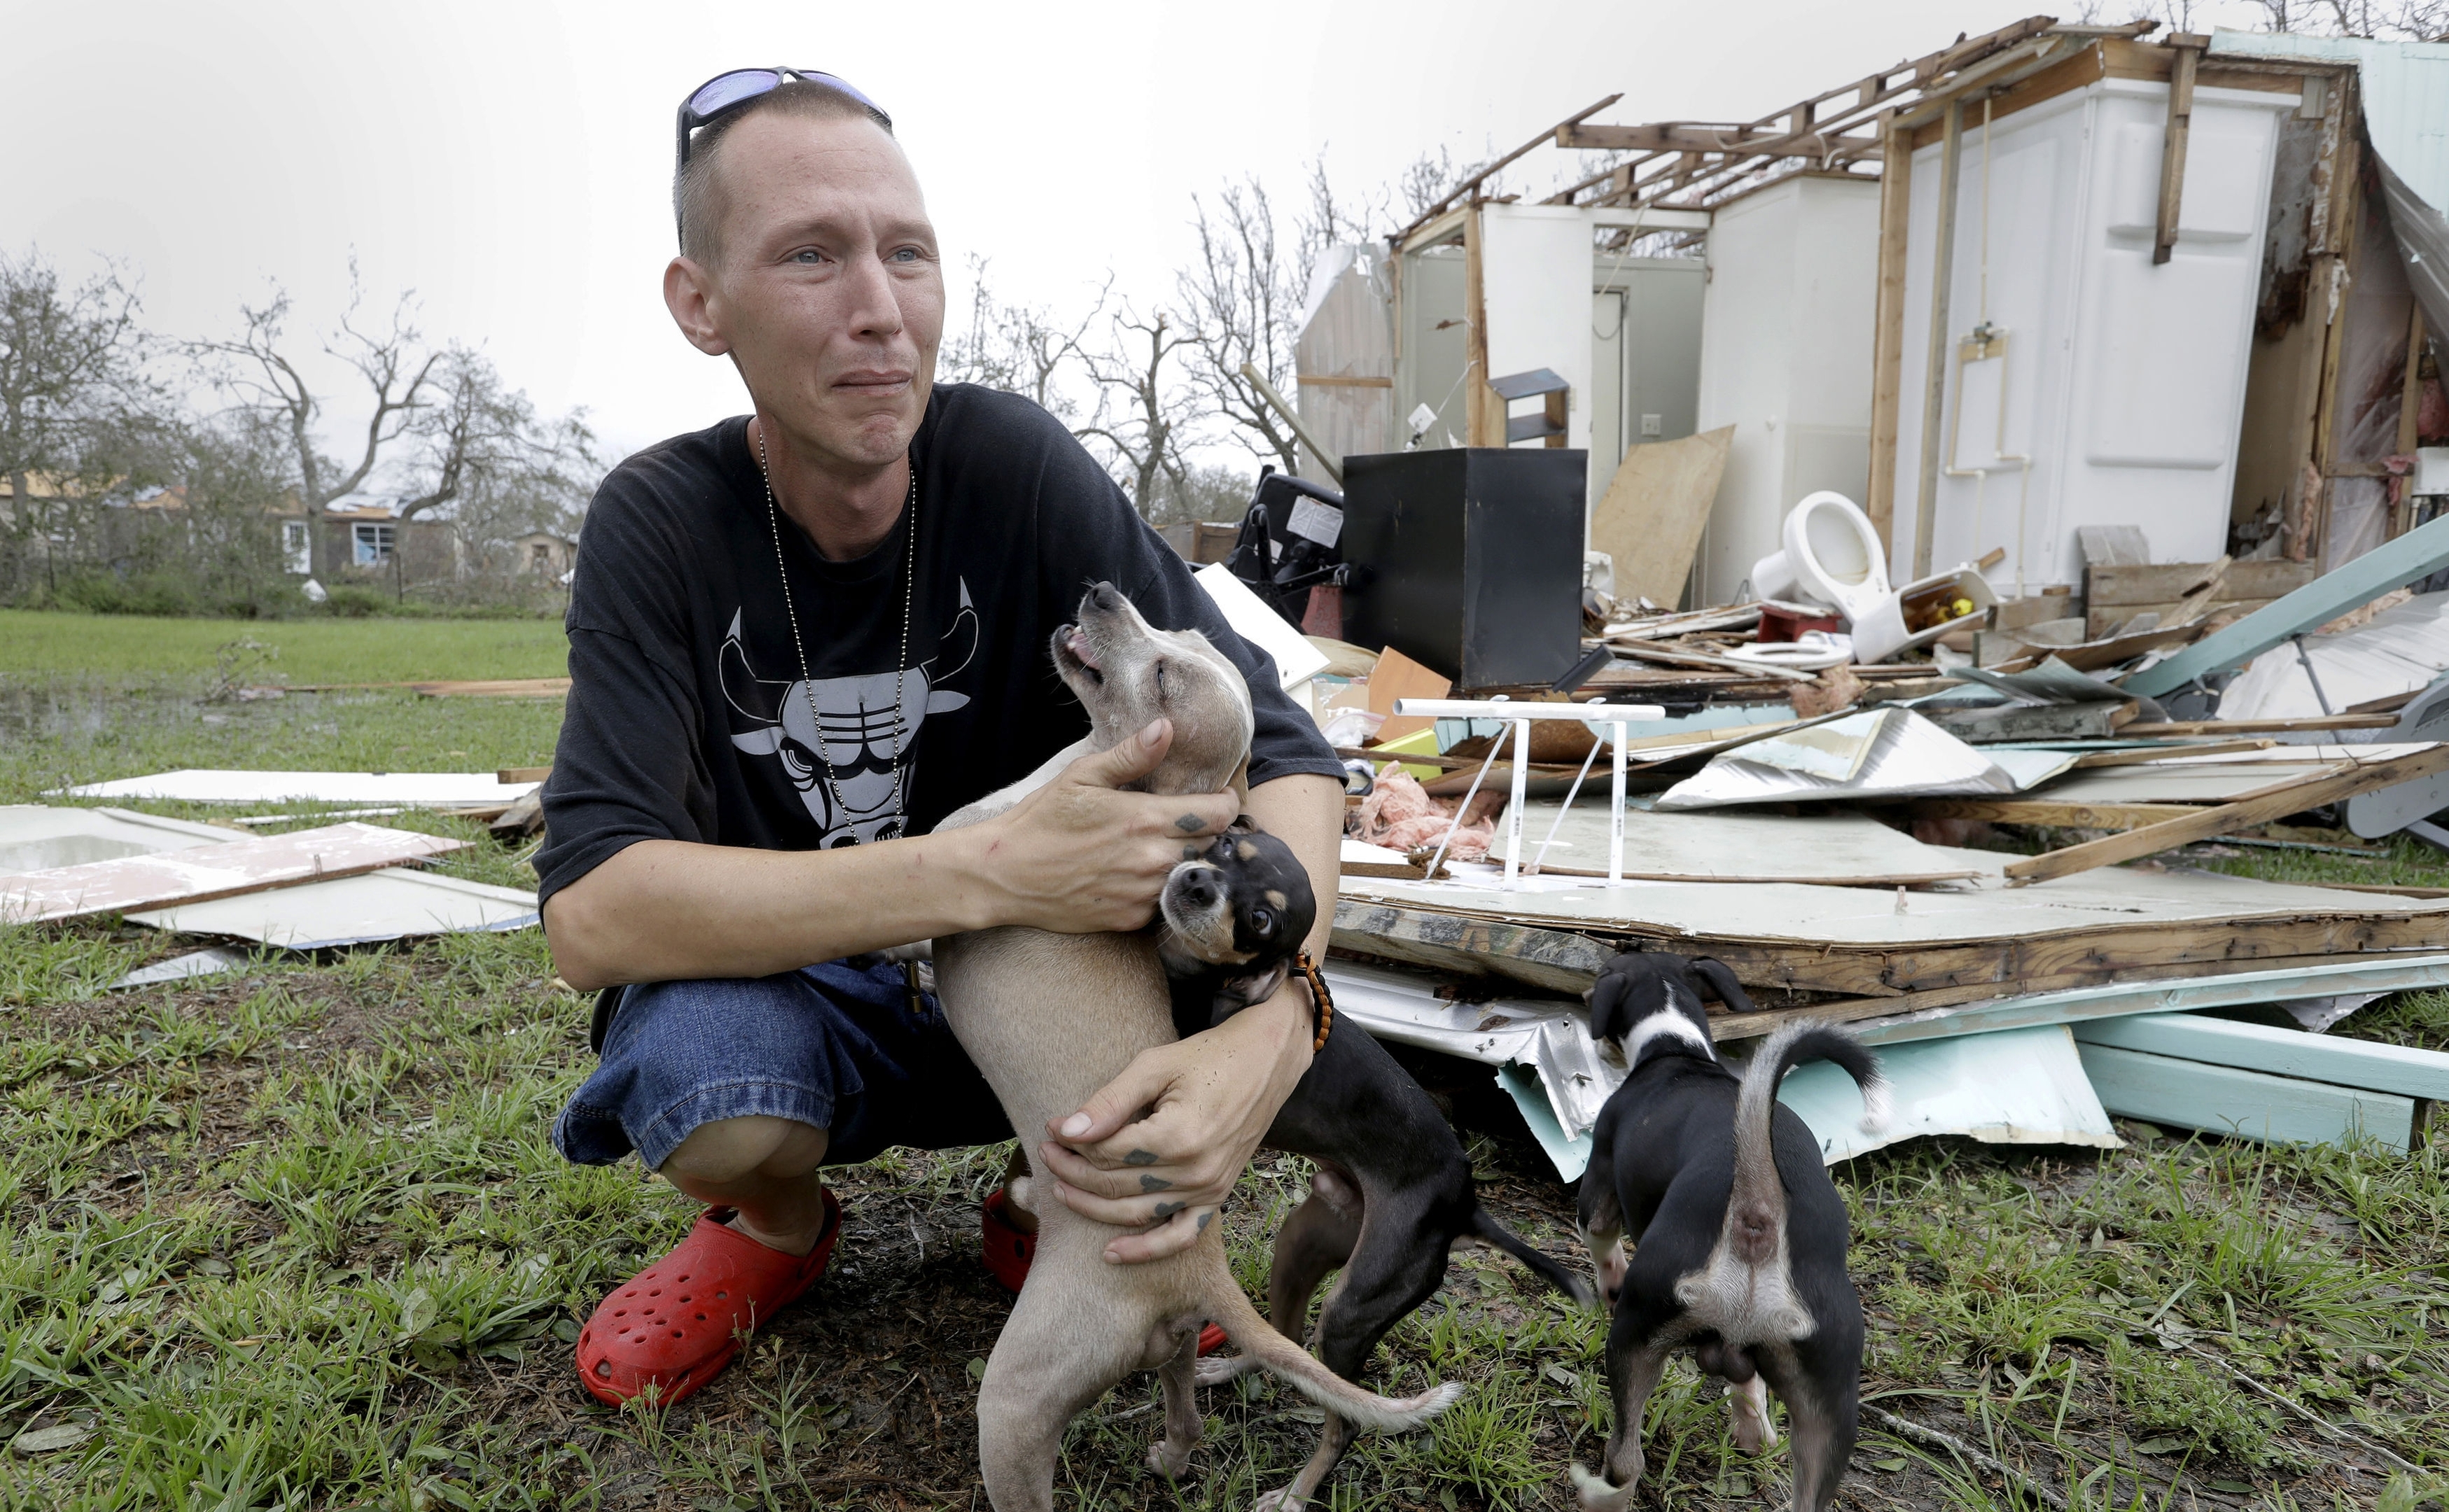 Sam Speights tries to hold back tears while holding his dogs and surveying the damage to his home in the wake of Hurricane Harvey